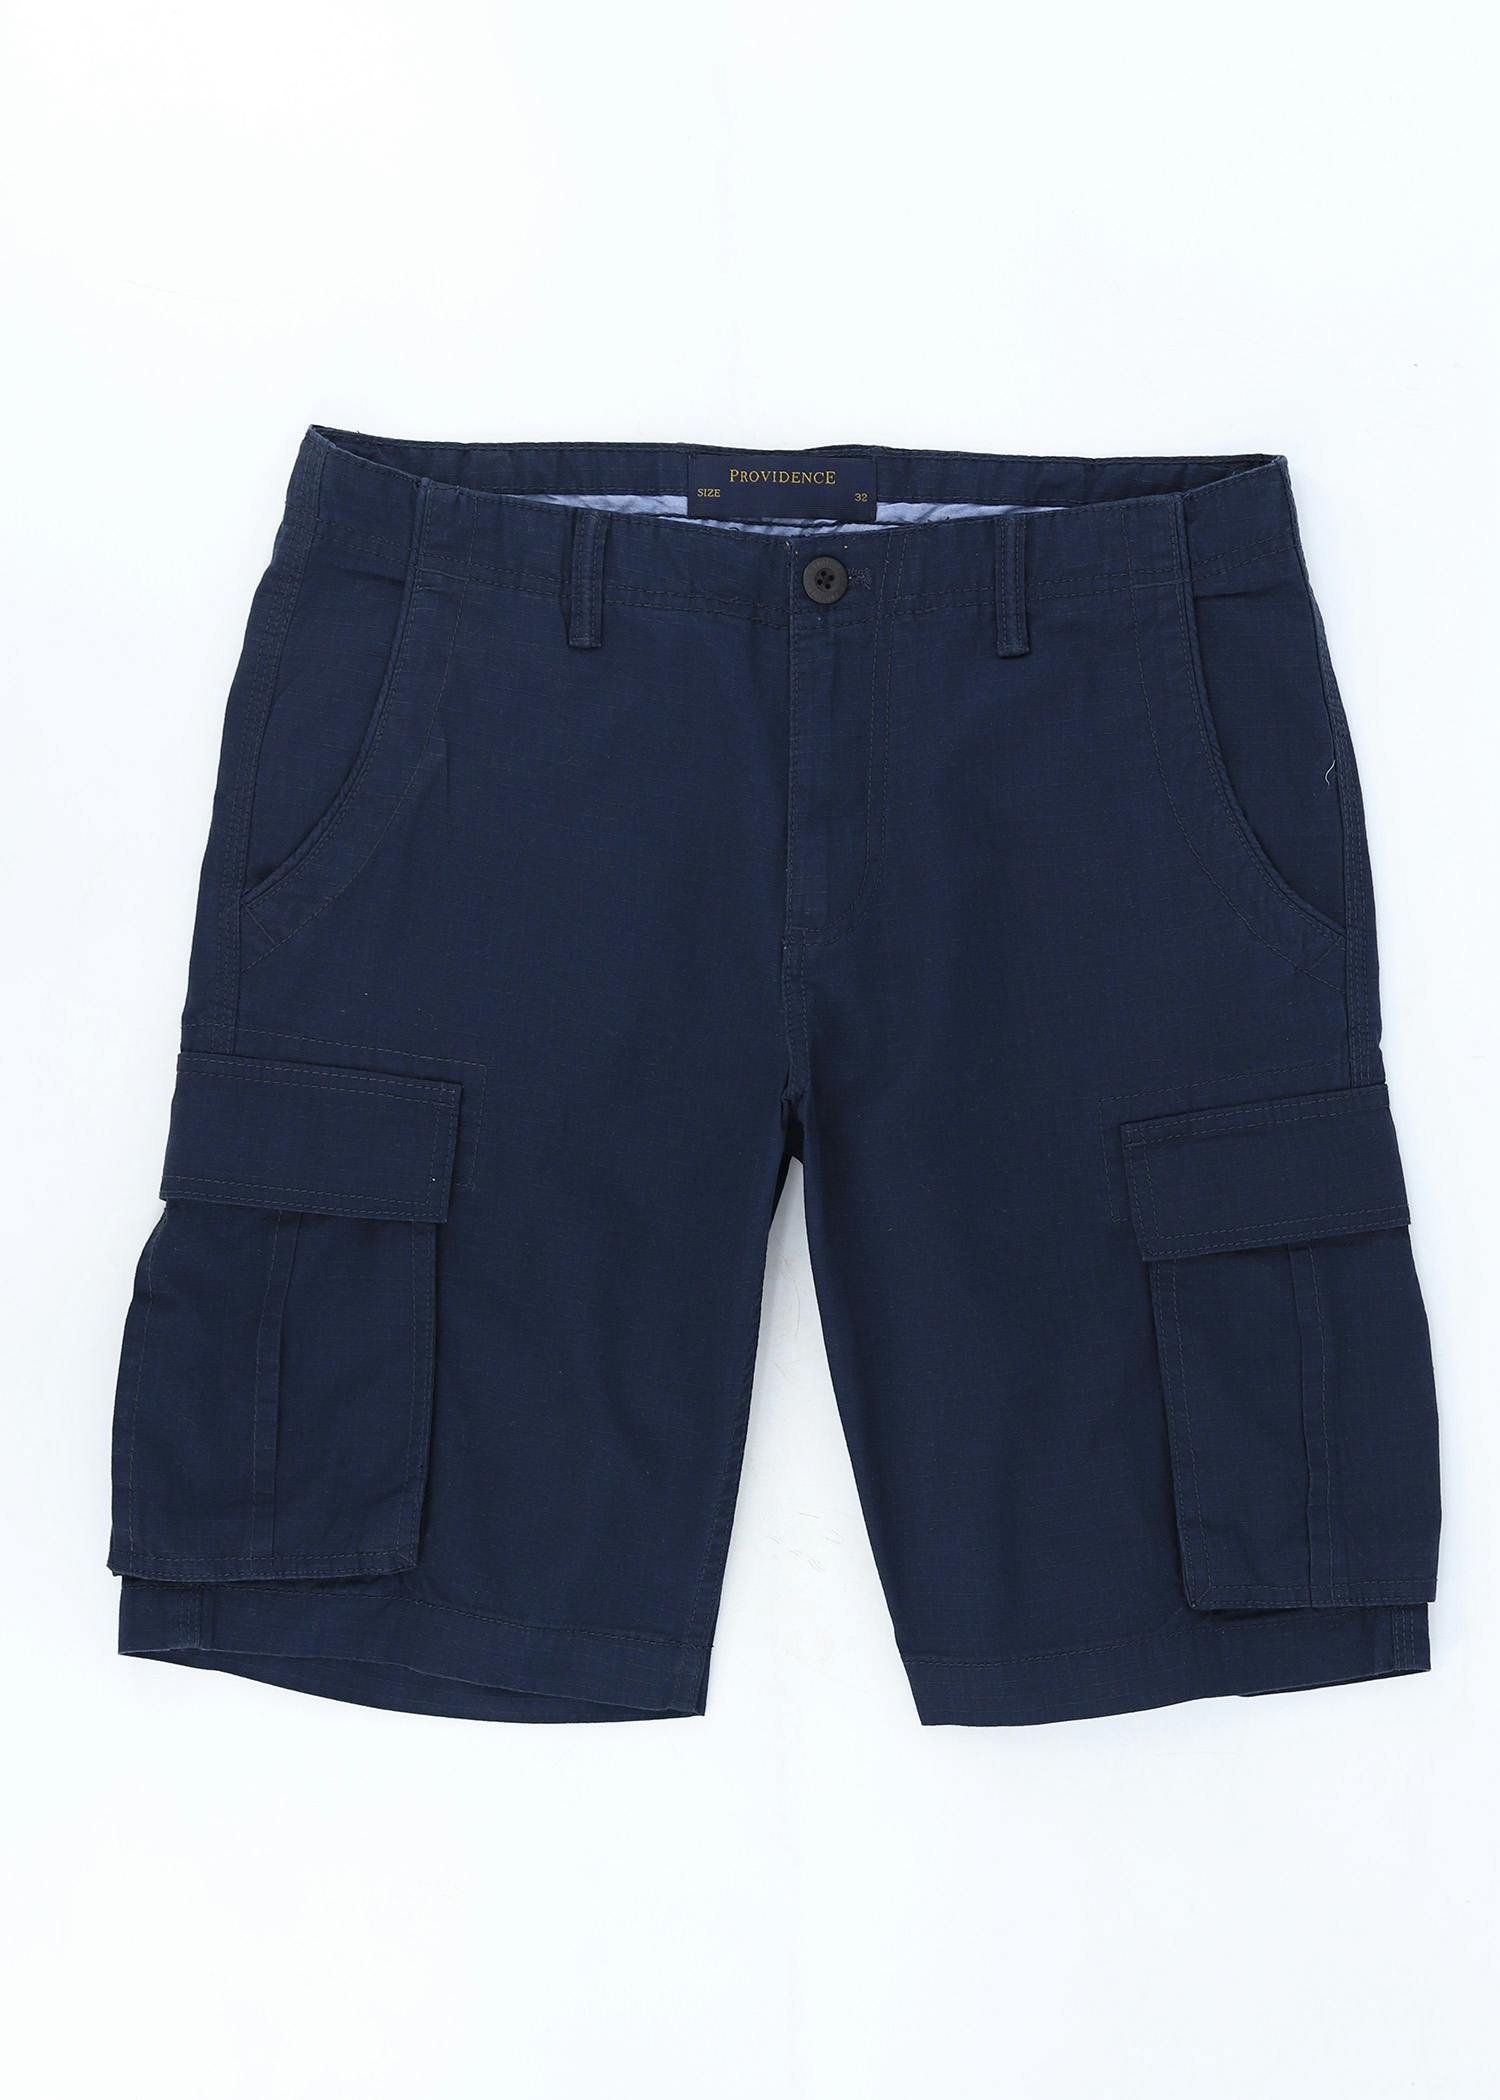 vulture iv cargo short navy color front view